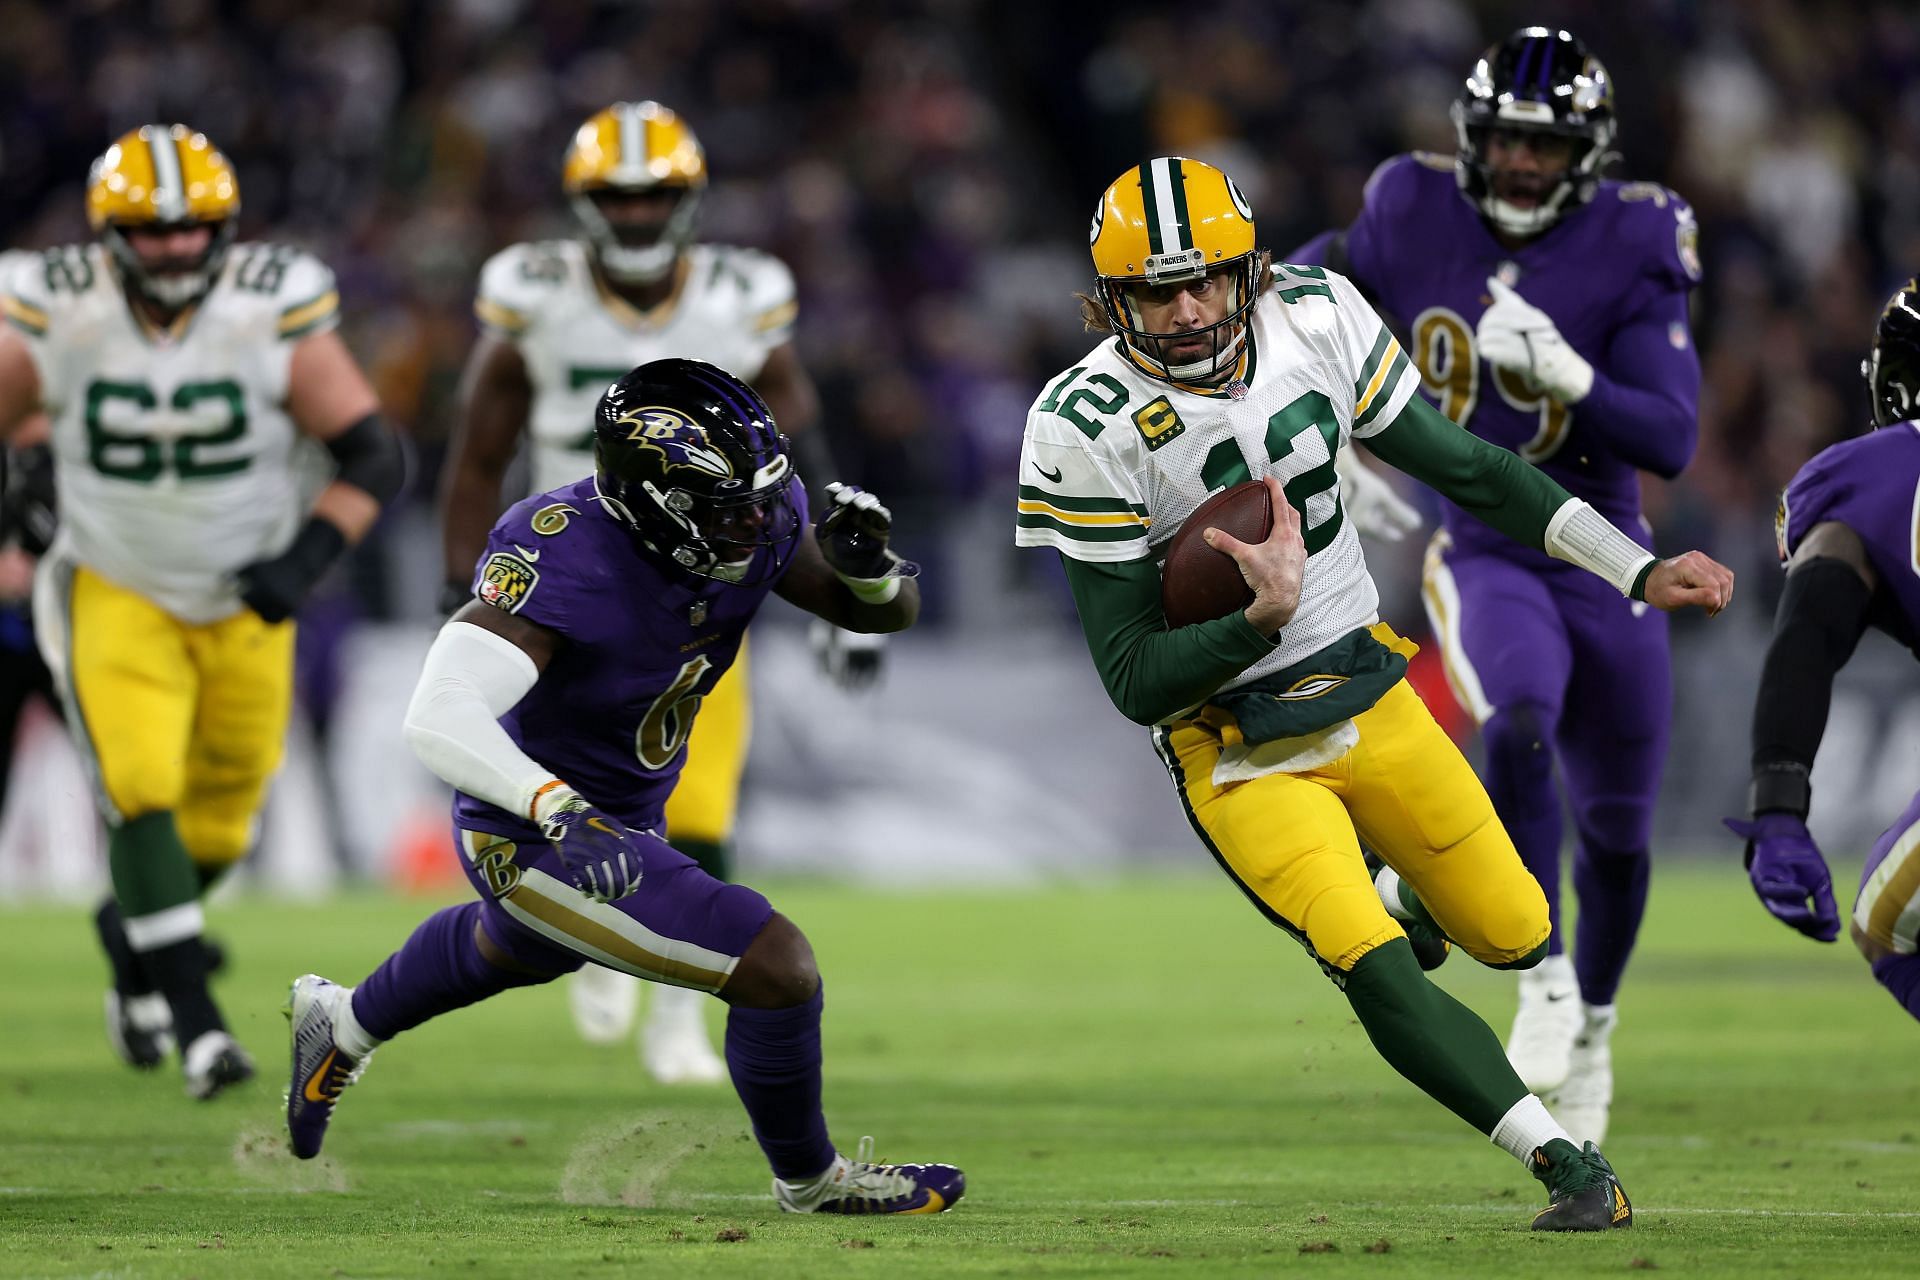 Aaron Rodgers is on the run vs. Baltimore Ravens in Week 15